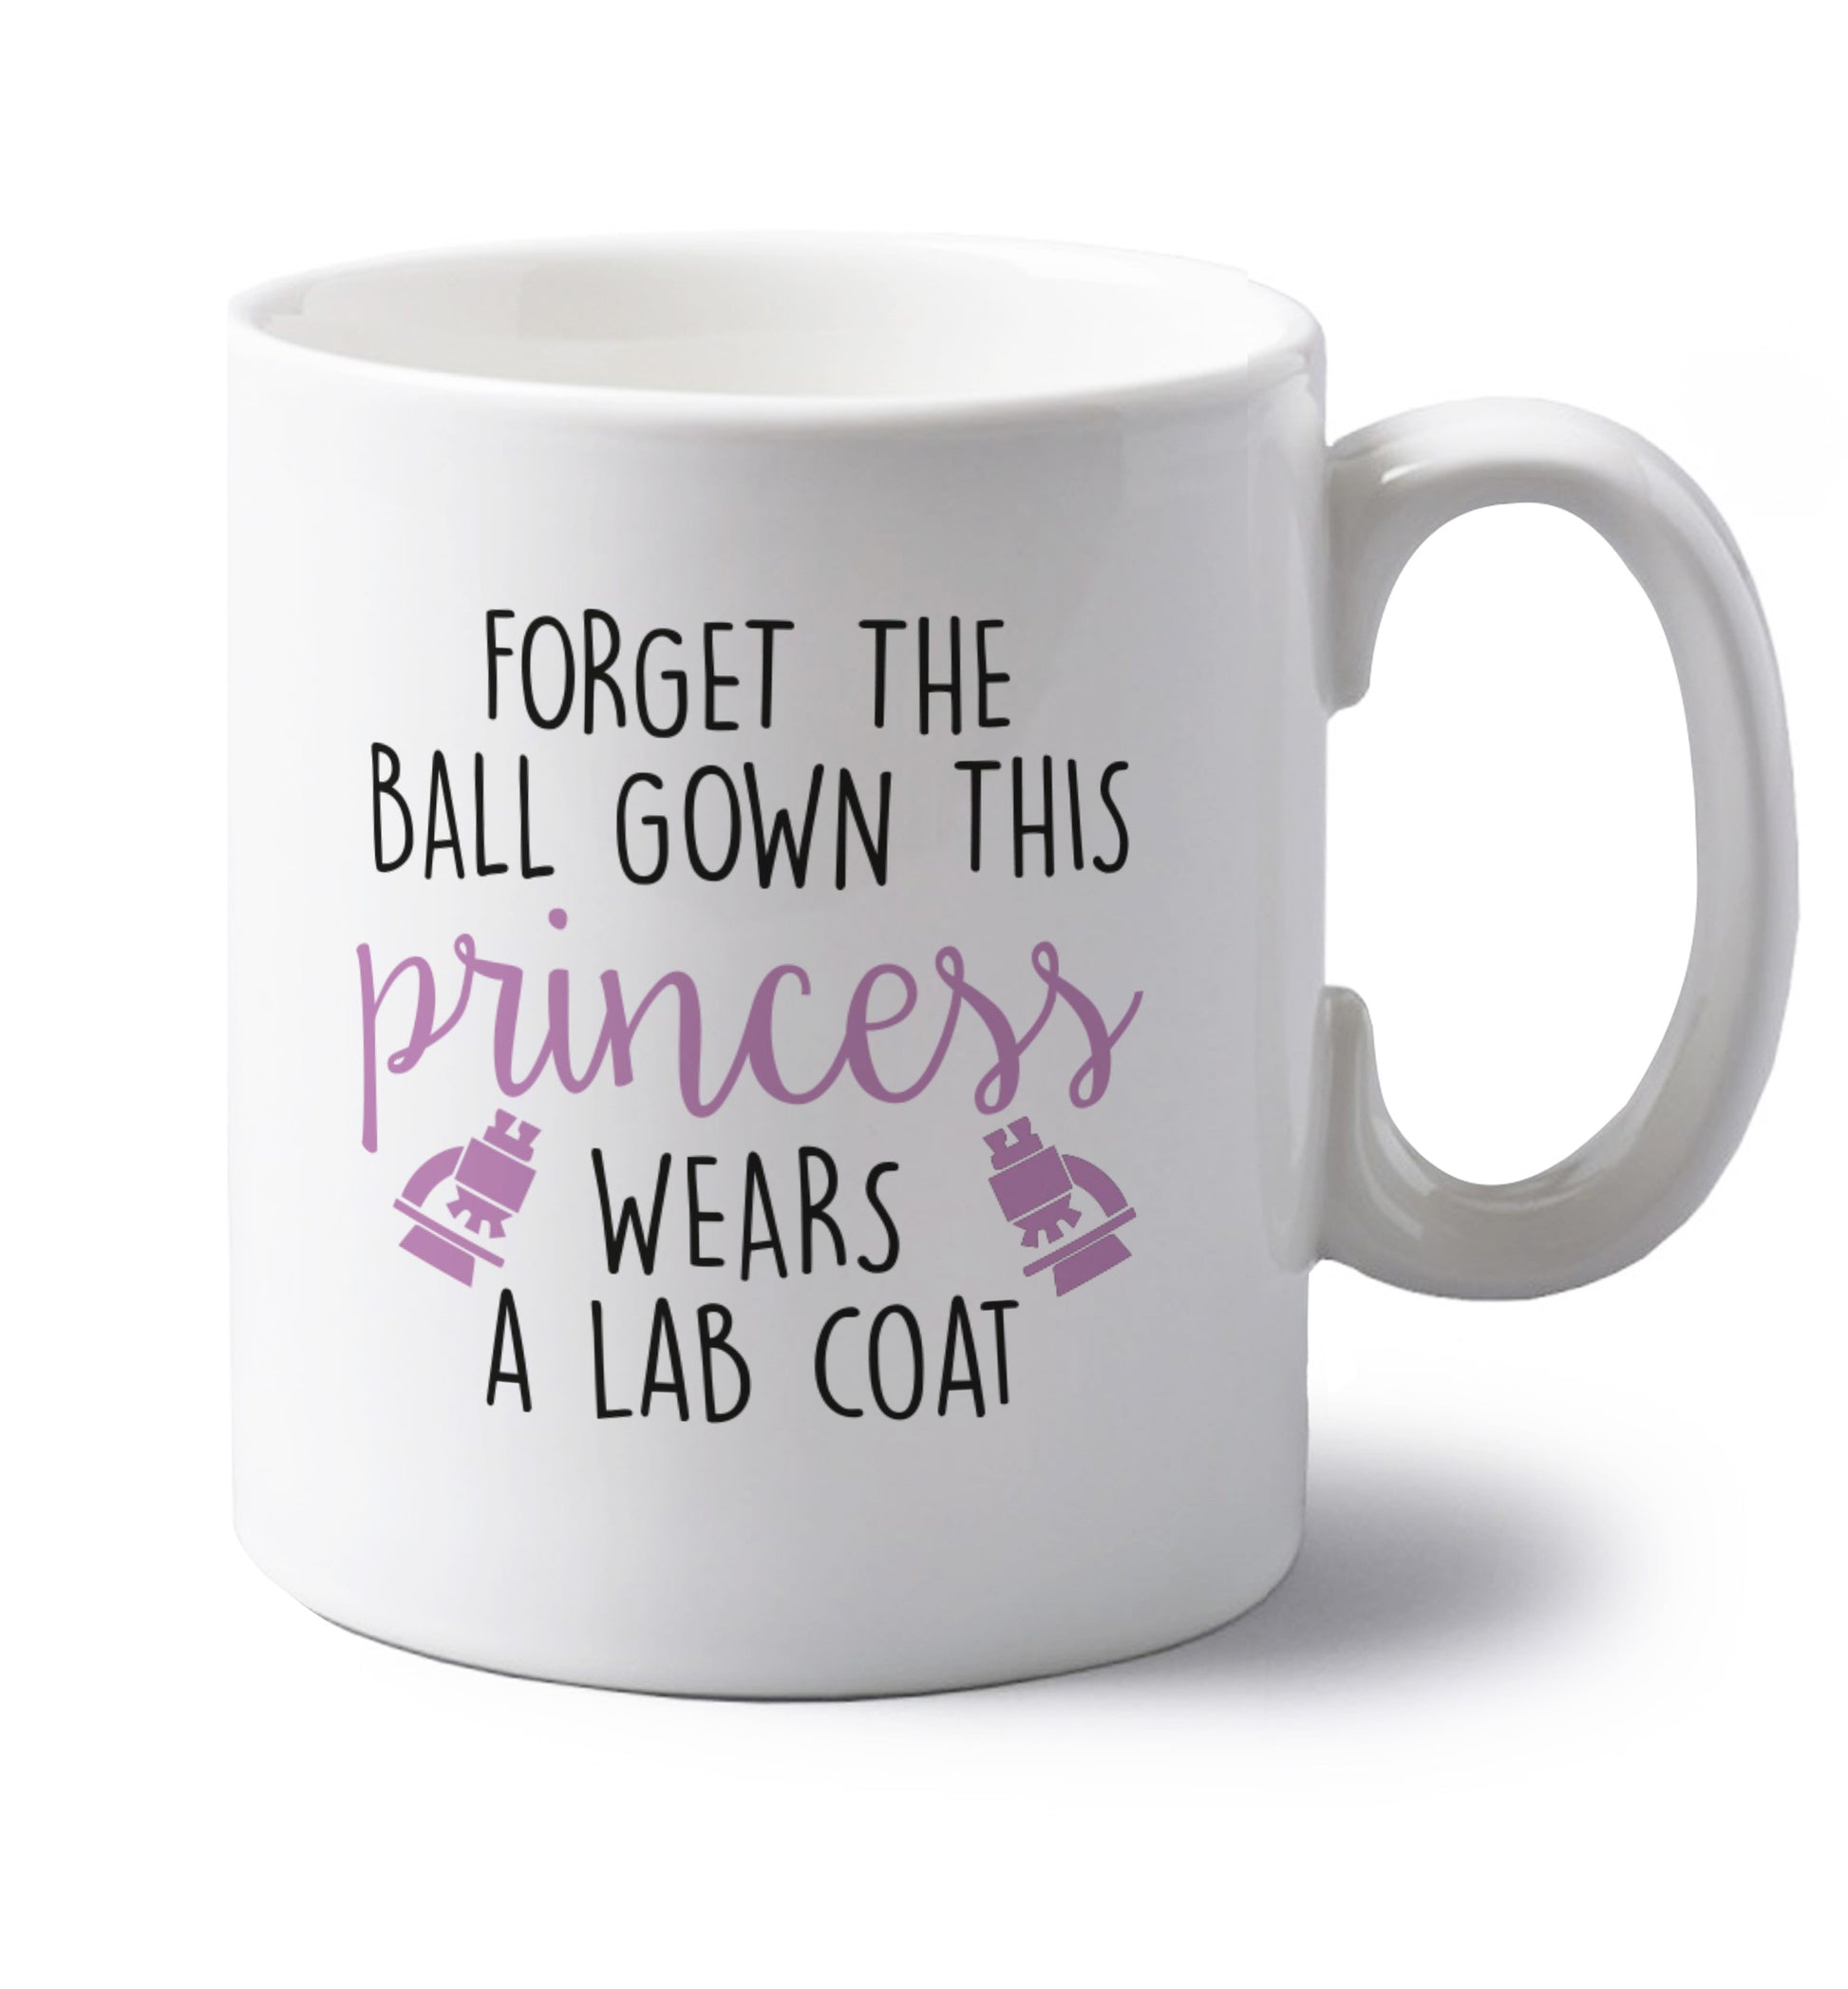 Forget the ball gown this princess wears a lab coat left handed white ceramic mug 